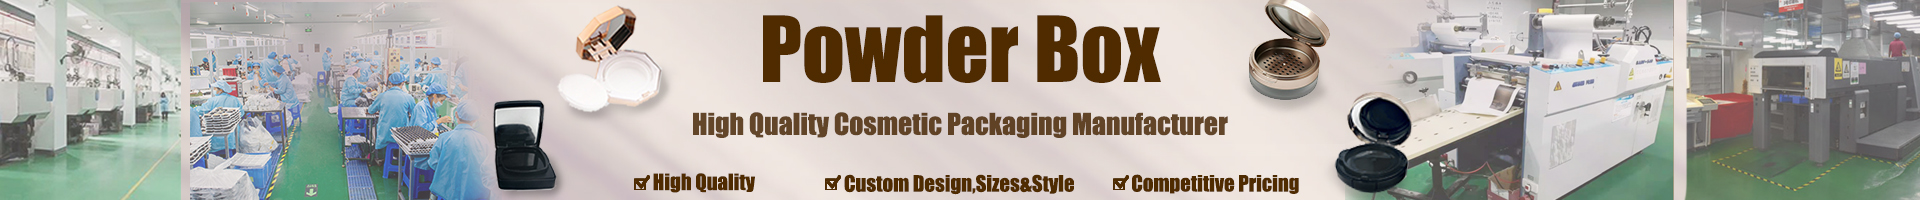 Product Banner